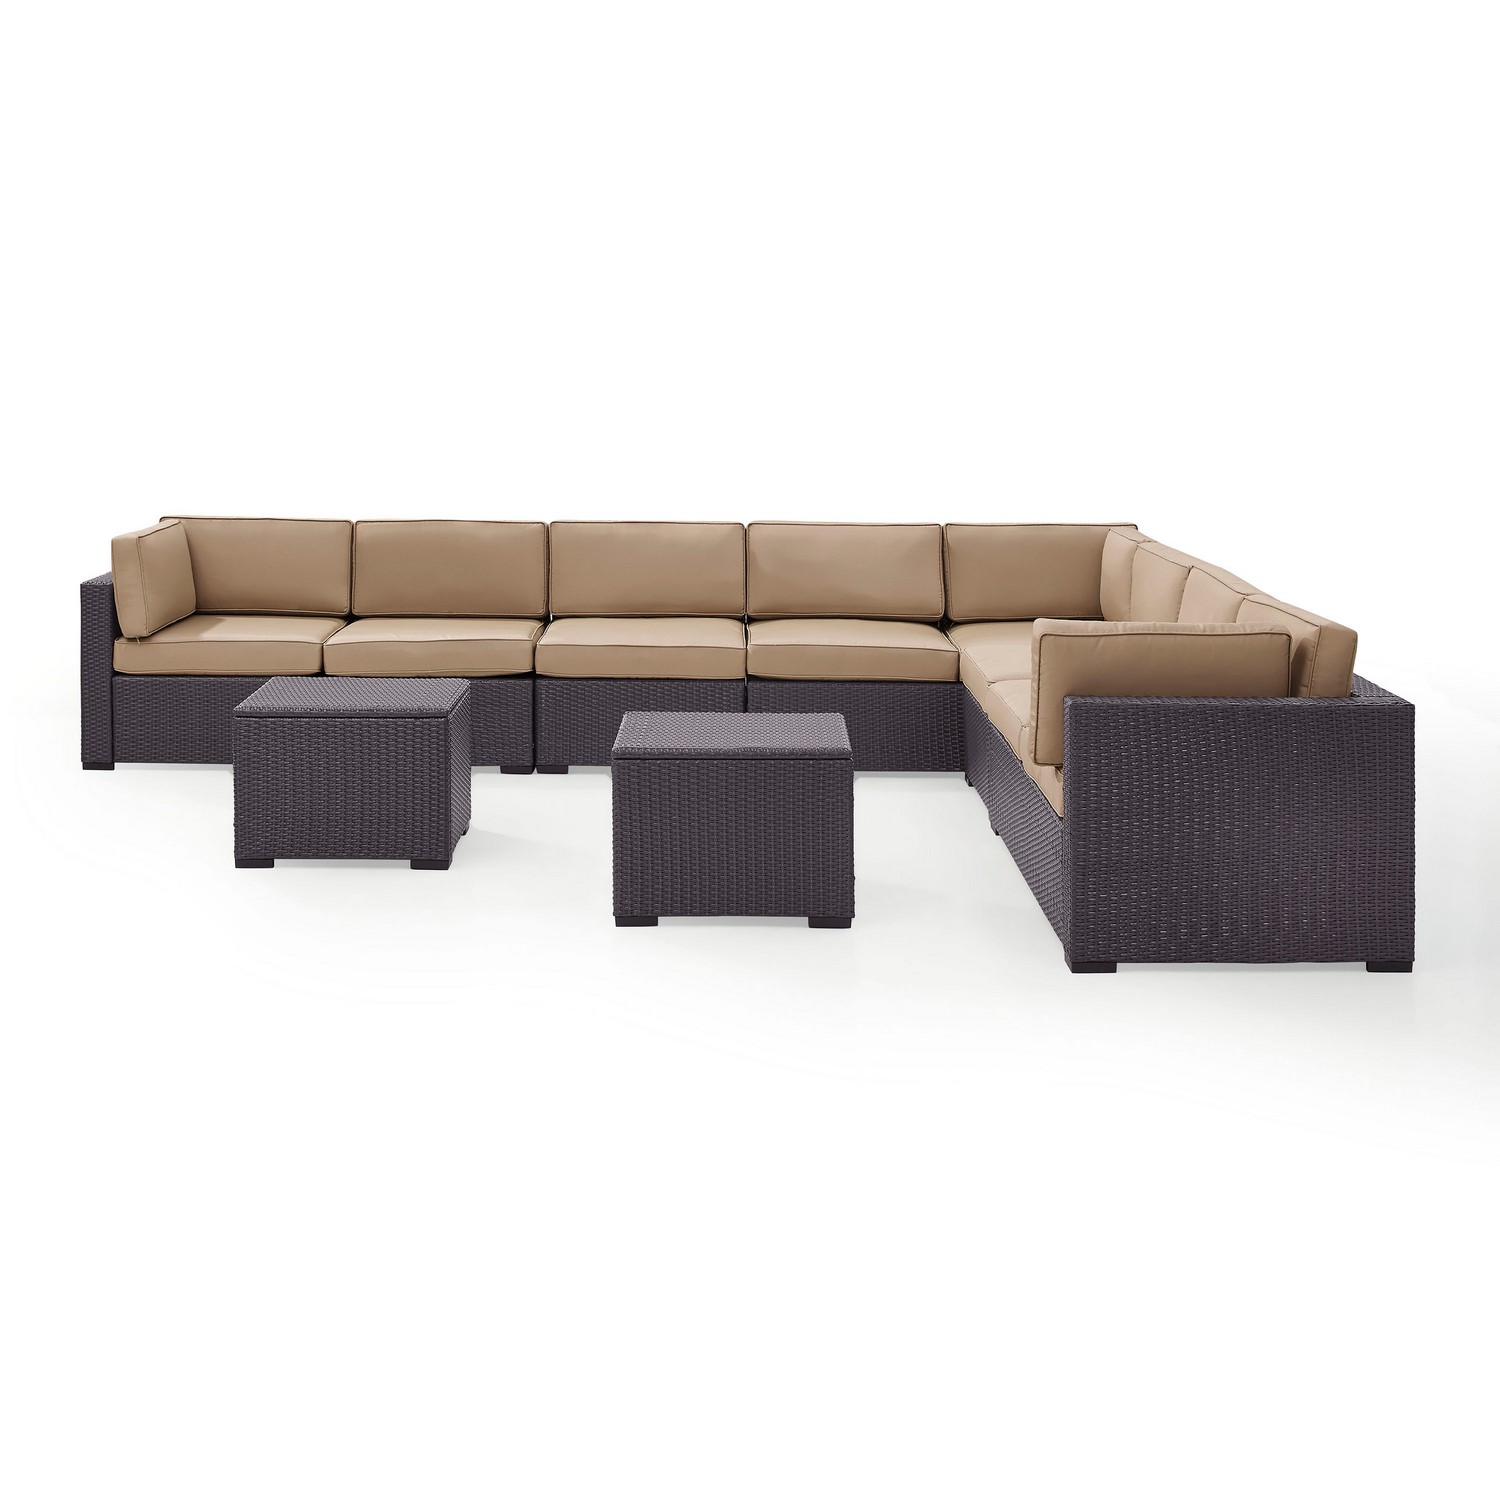 Crosley Biscayne 7-PC Outdoor Wicker Sectional Set - 3 Loveseats, 2 Armless Chair, 2 Coffee Tables - Mocha/Brown